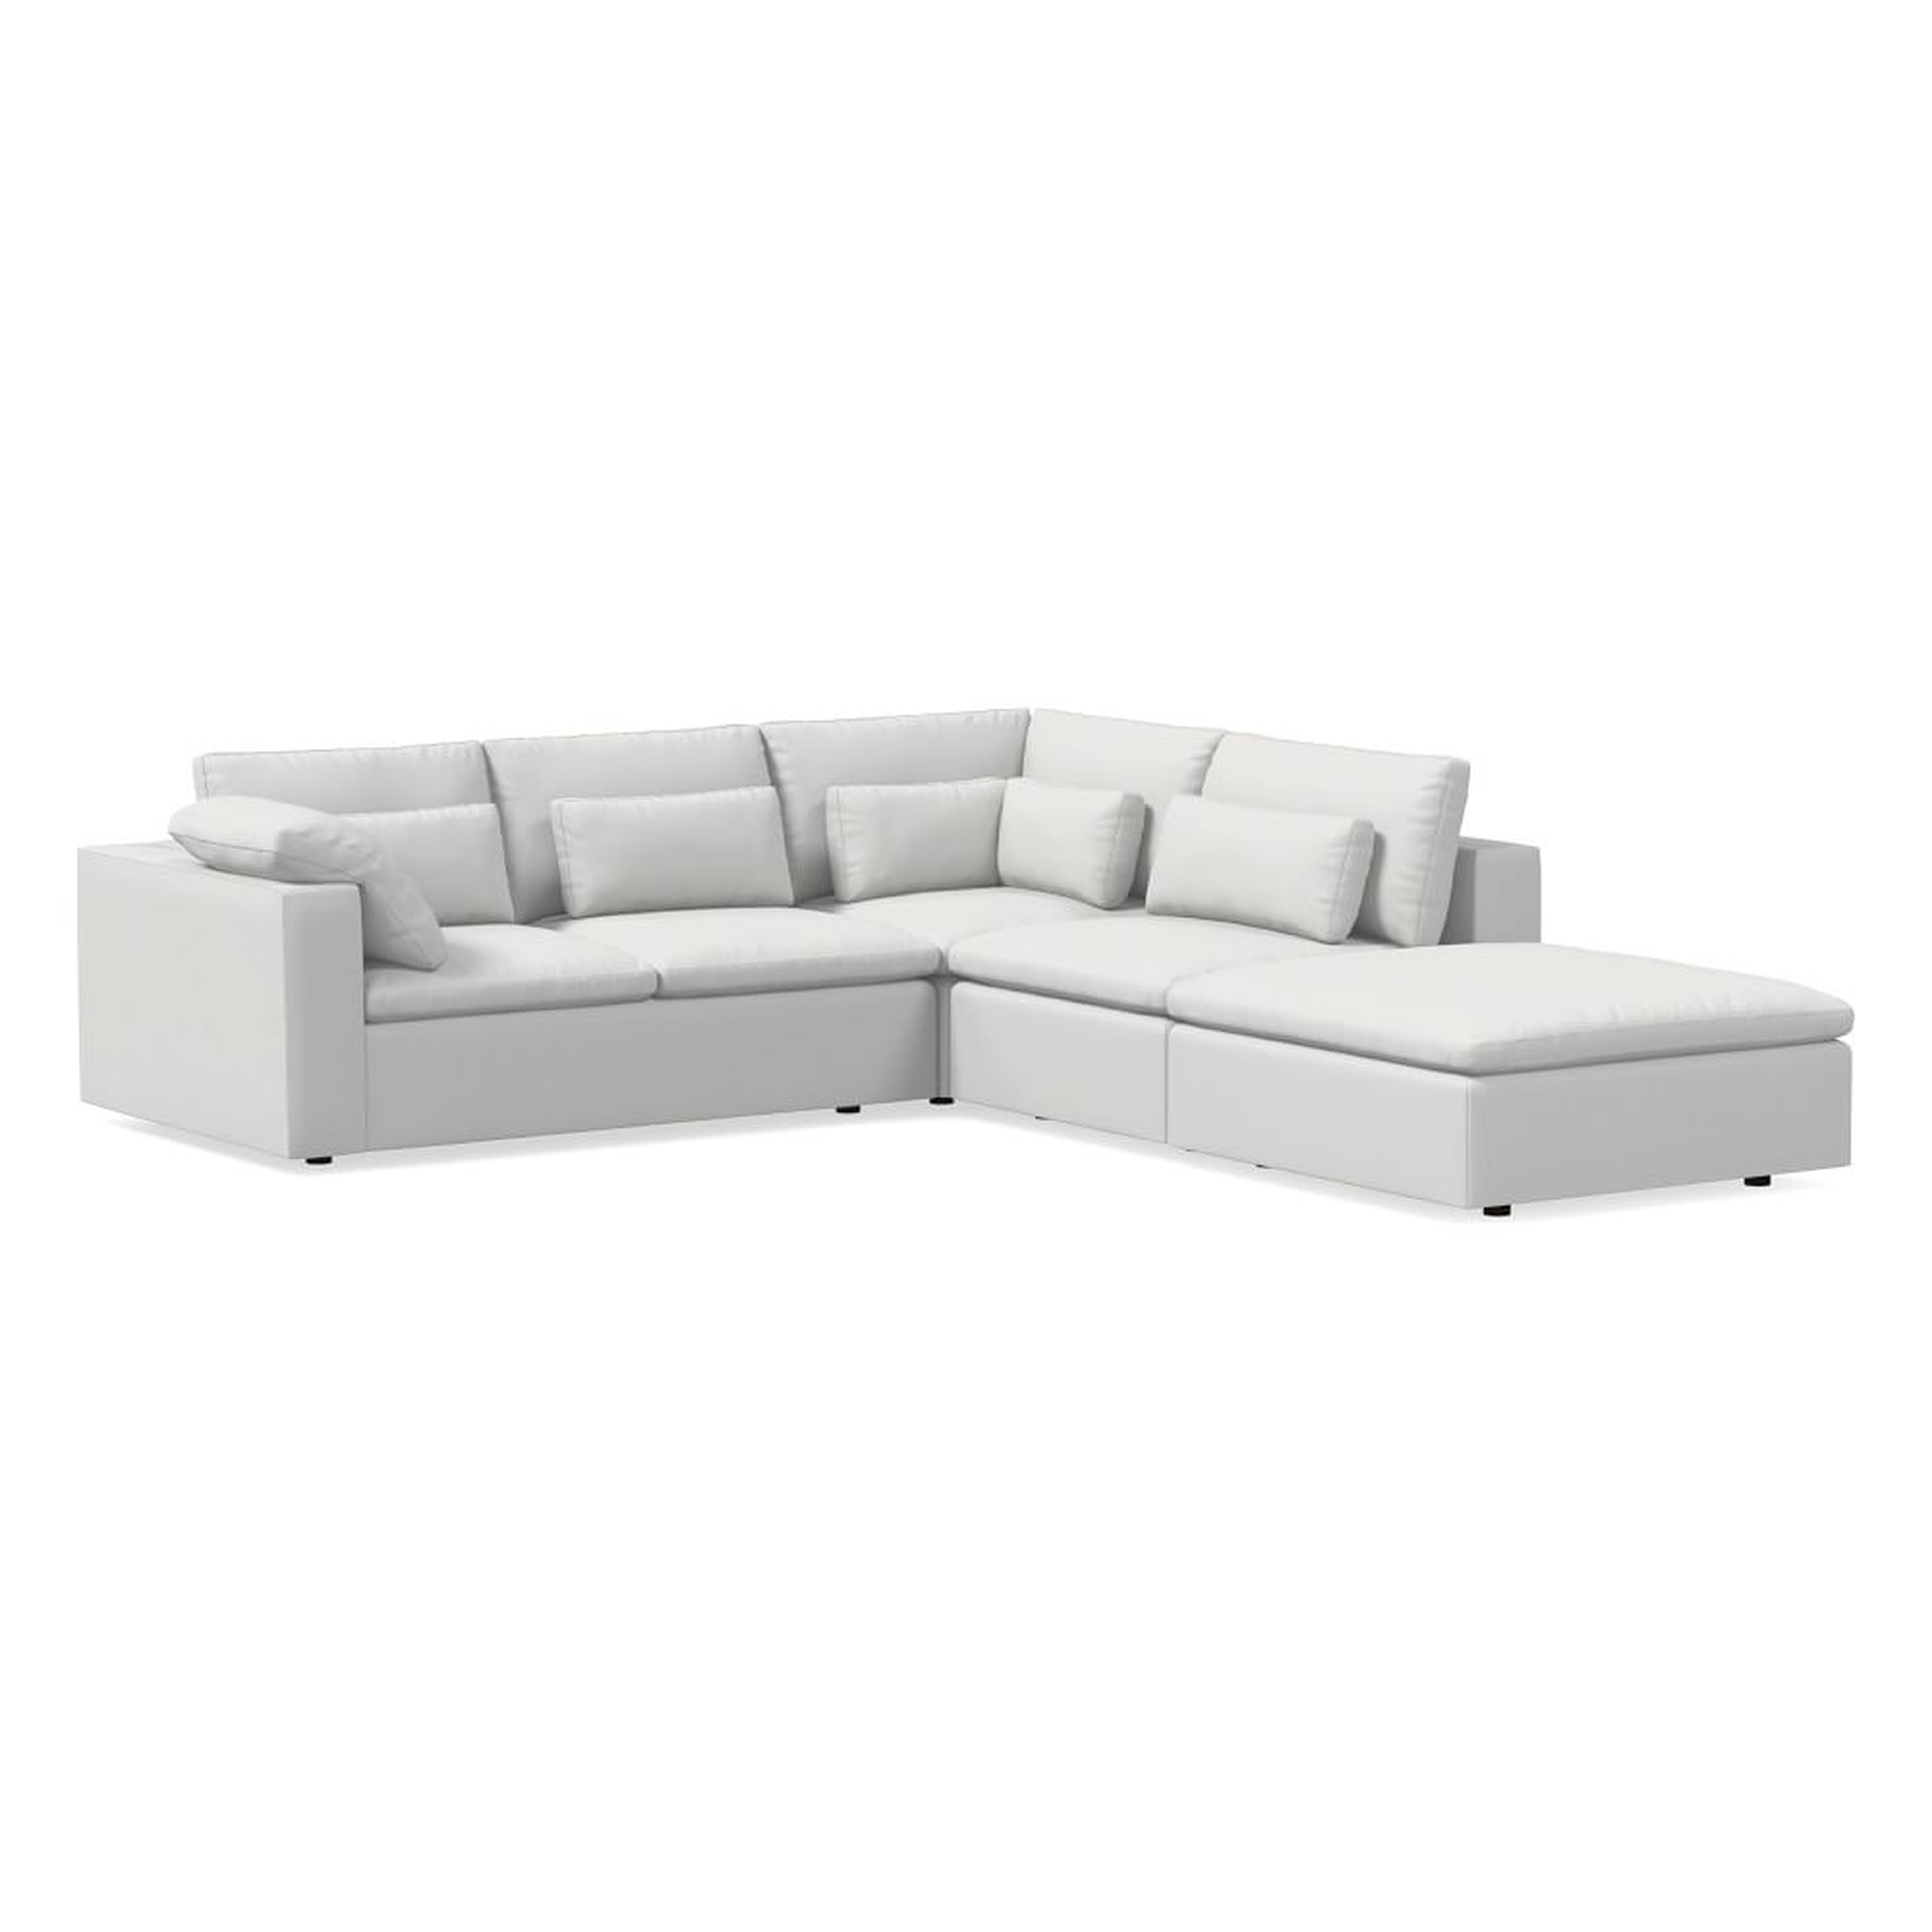 Harmony Modular 121" Right Multi Seat 4-Piece Sectional, Standard Depth, Performance Washed Canvas, White - West Elm